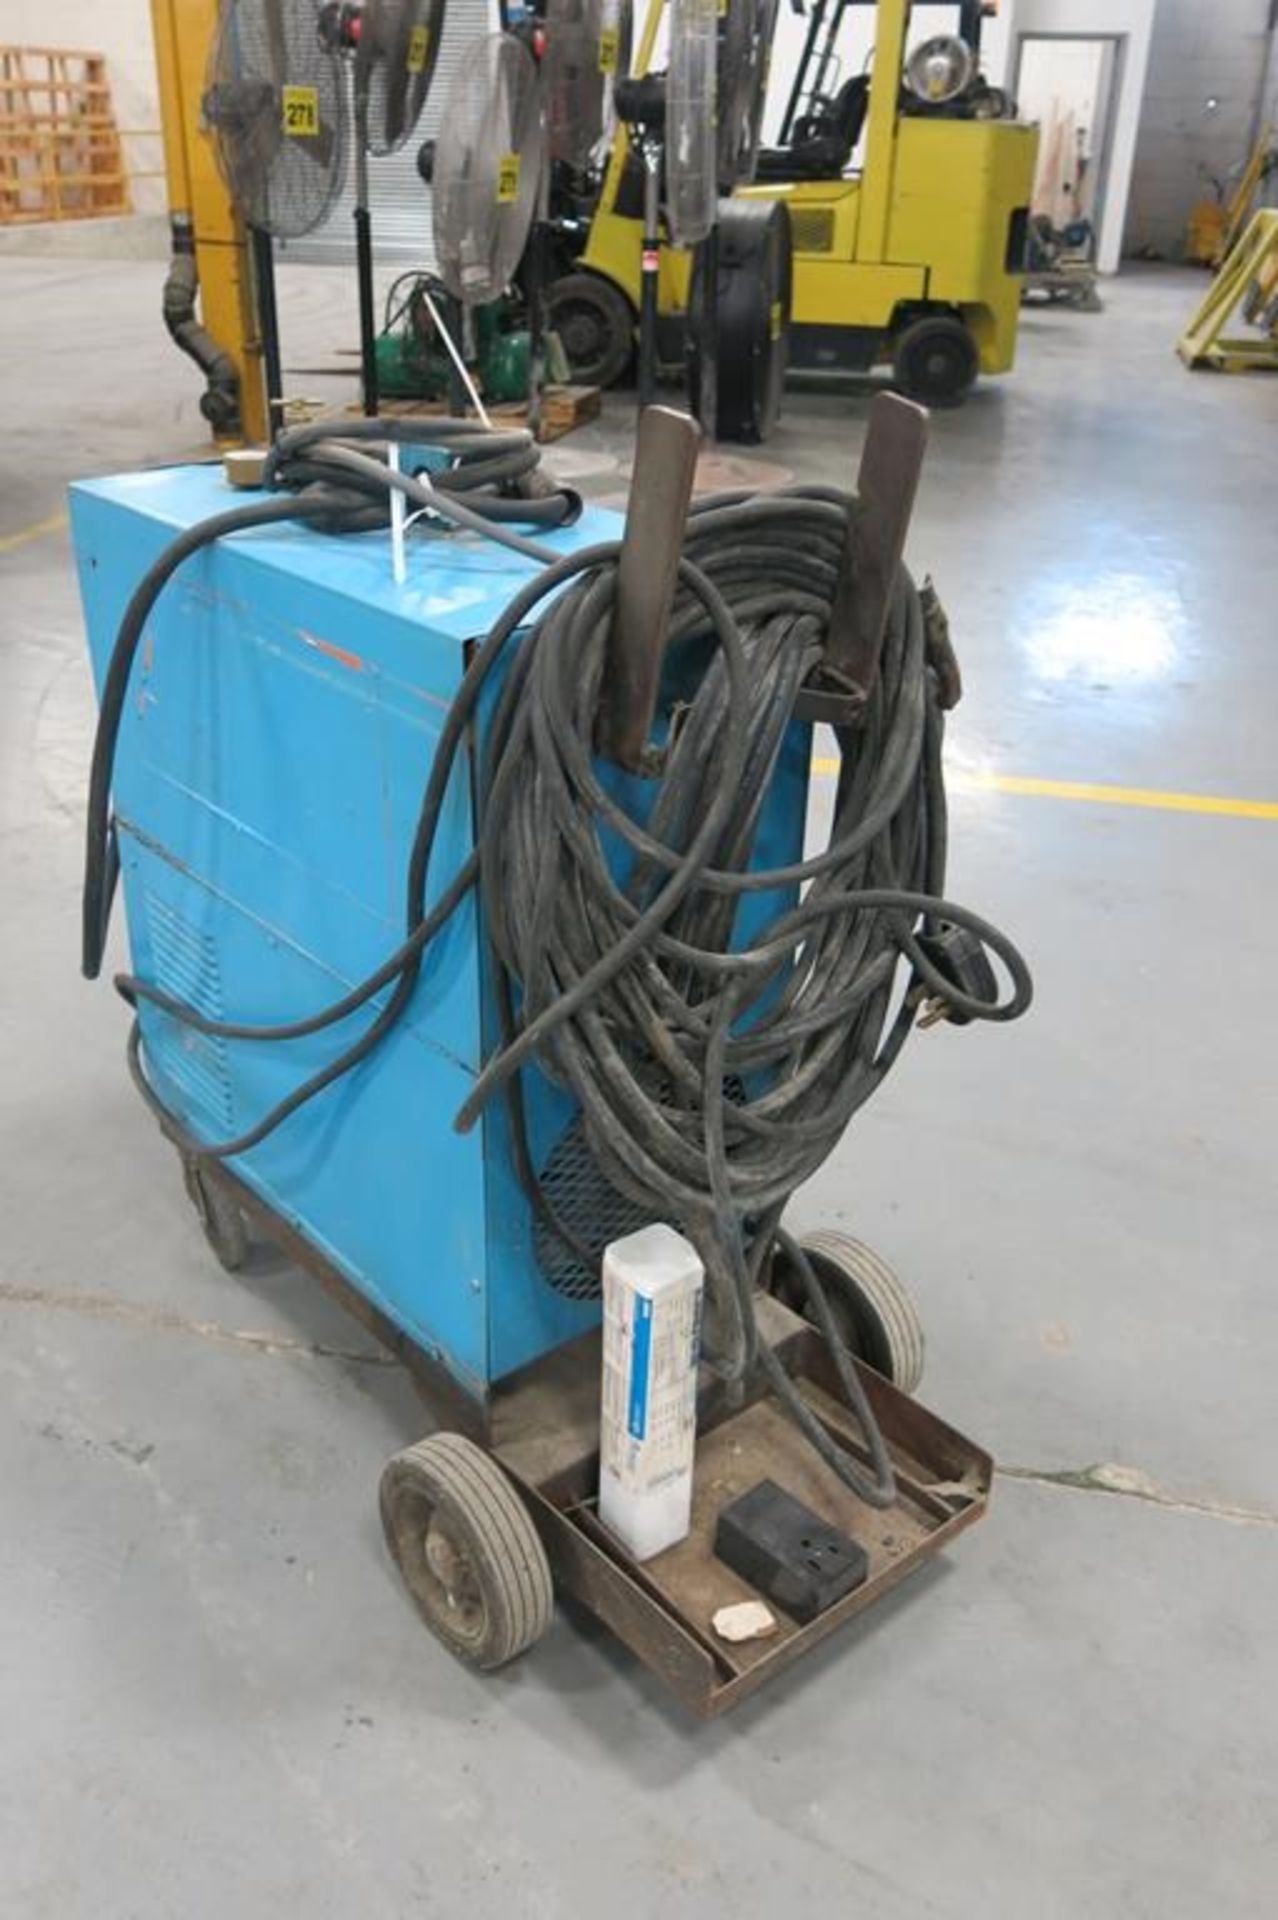 AIRCO, 200 AMP, ARC WELDER WITH MIG WIRE FEED ATTACHMENT, 220 VAC, SINGLE PHASE - Image 3 of 5